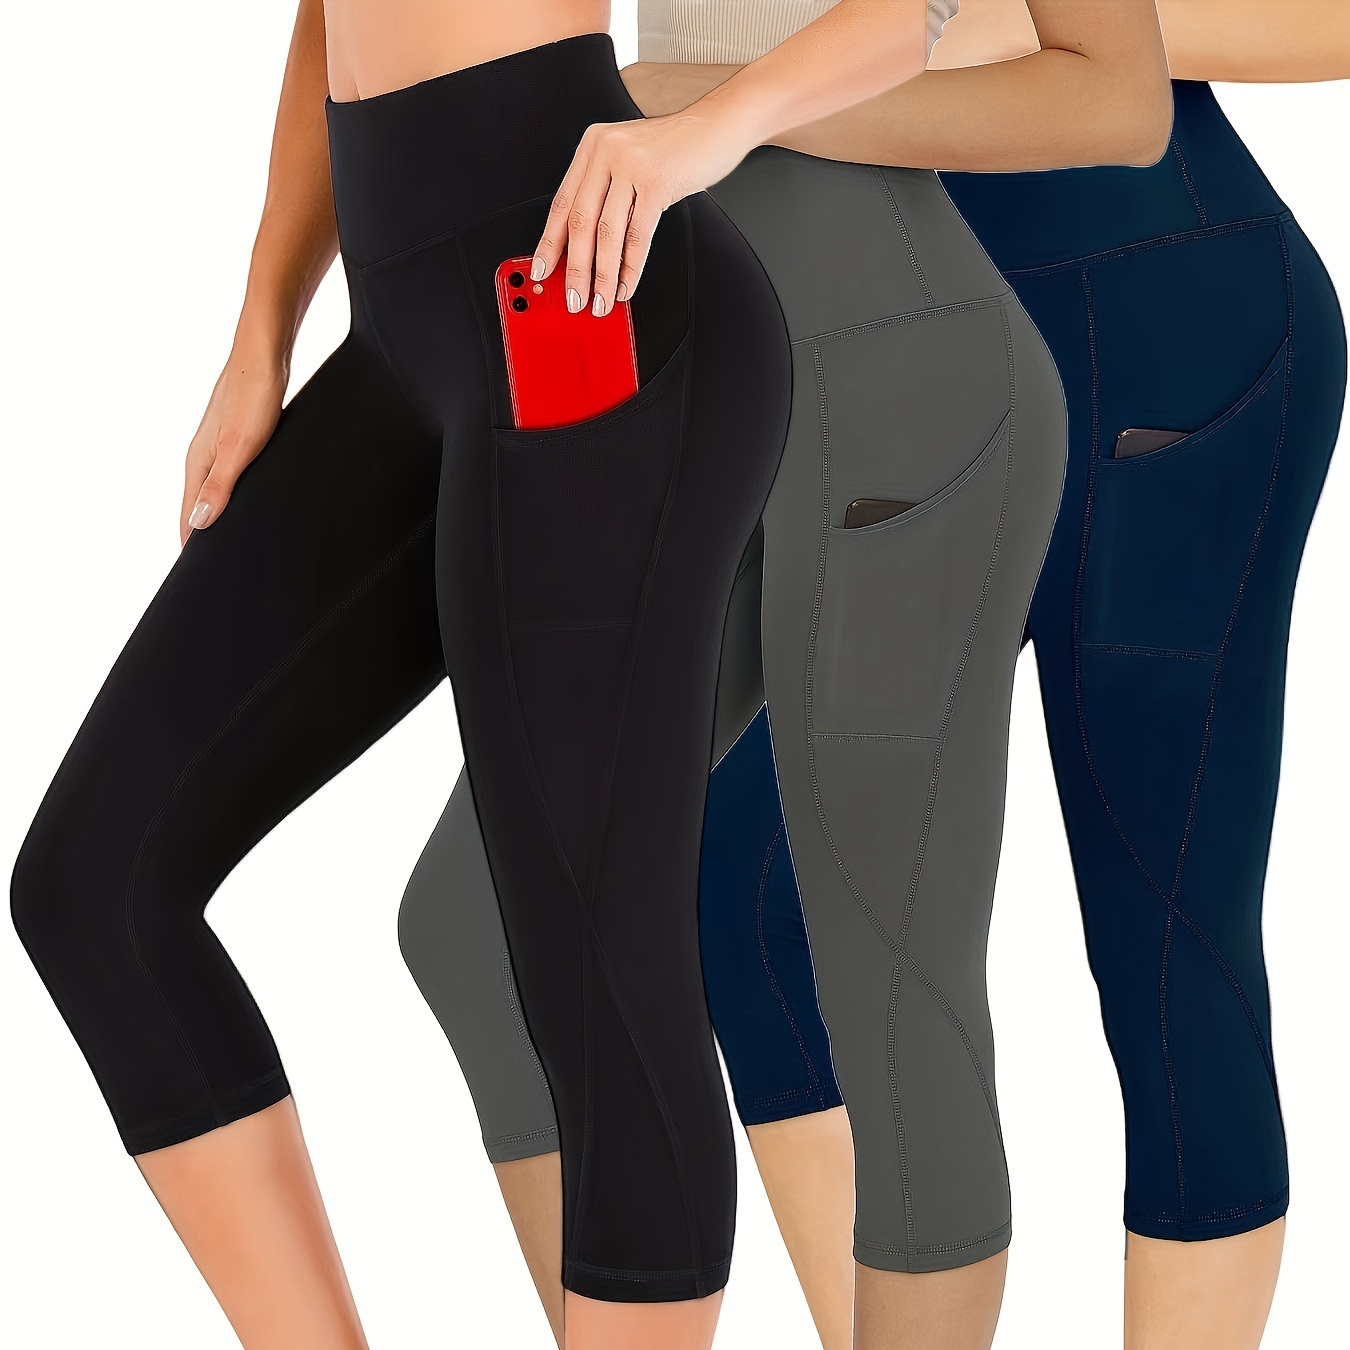 

3-pack Women's High-waist Tummy Control Breathable Yoga Pants, Athletic Workout Running Capris, Sports Leggings Style